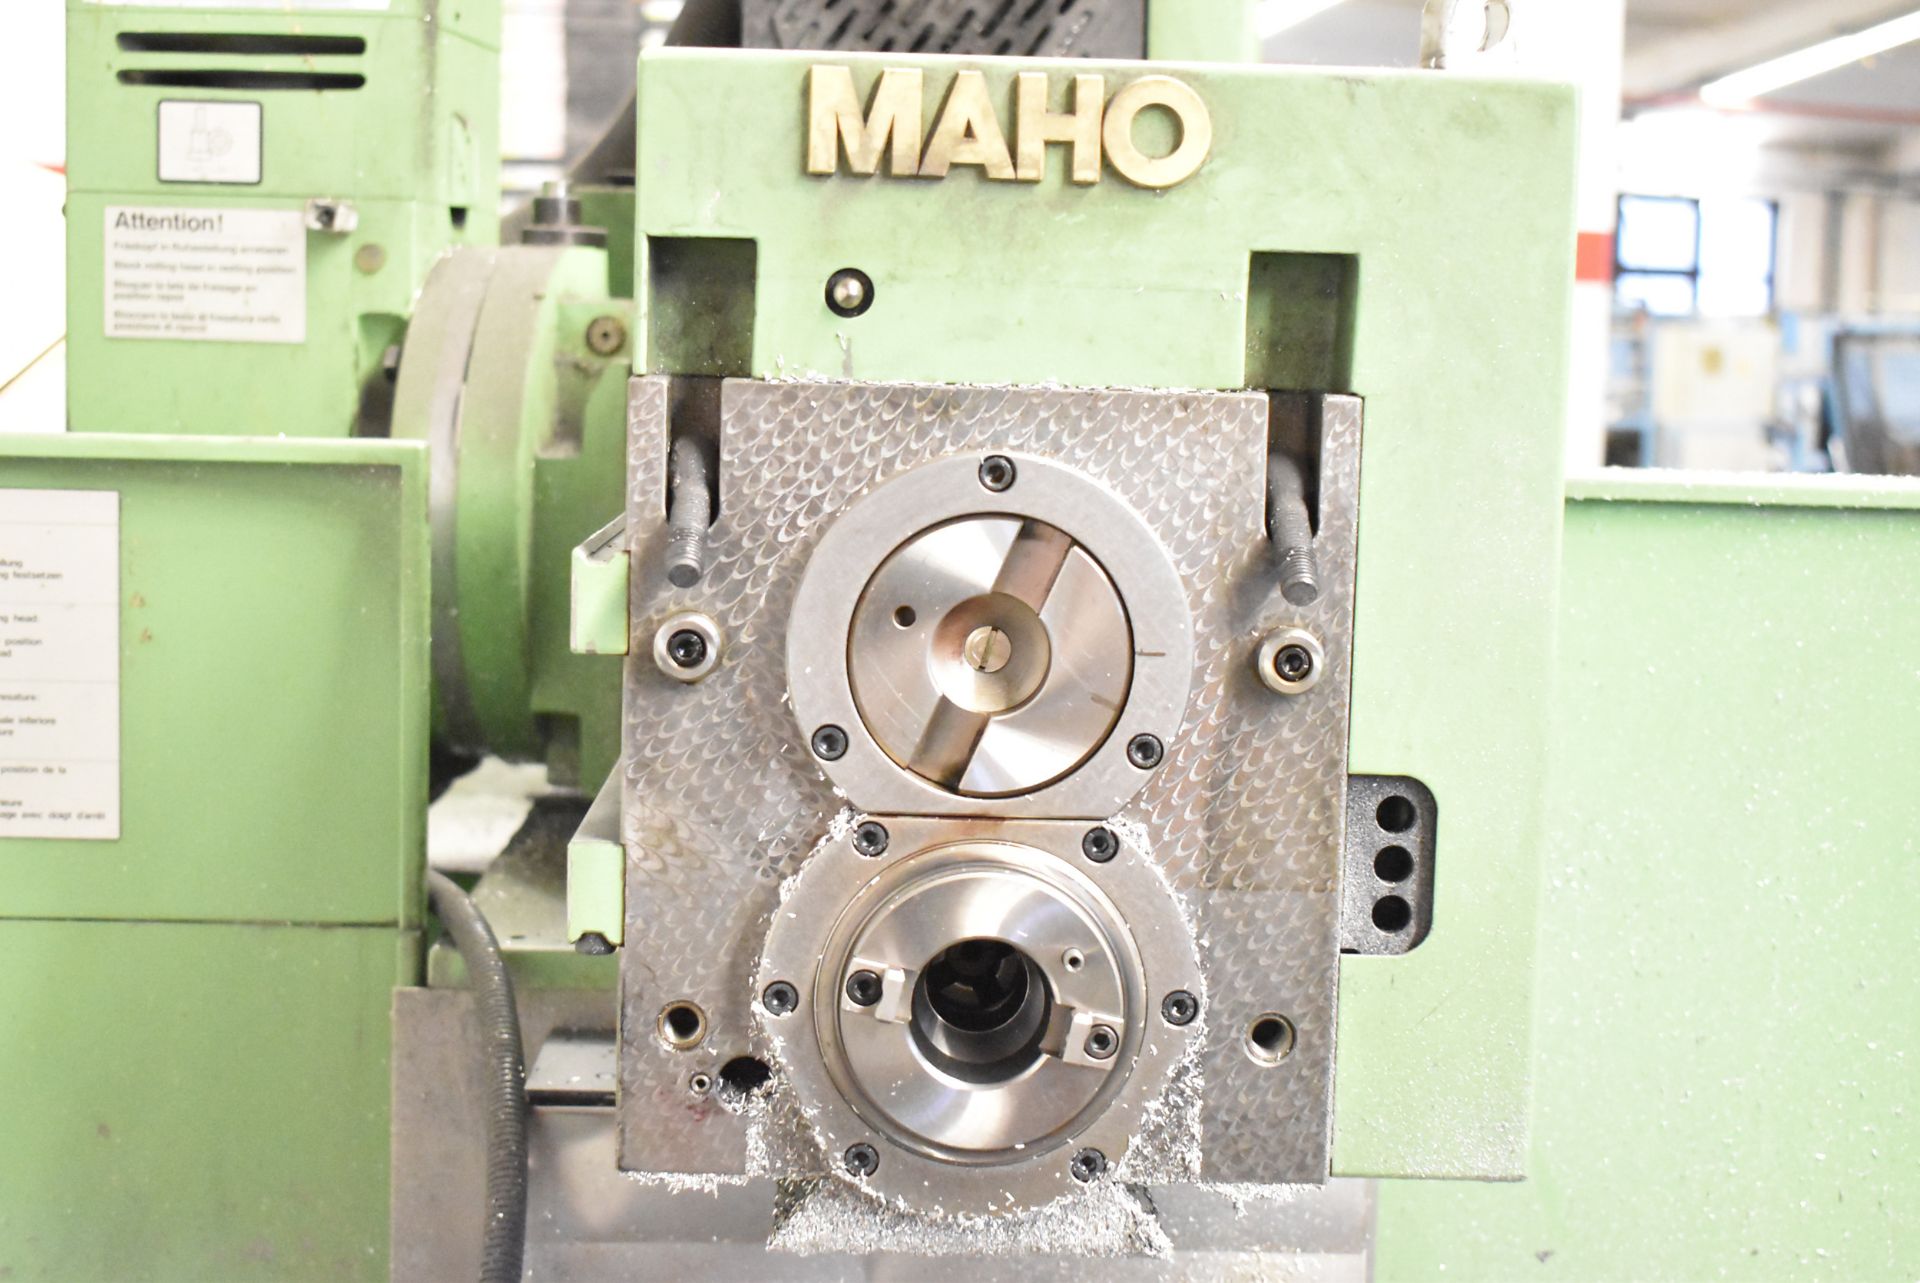 MAHO MH600E2 CNC UNIVERSAL MILLING MACHINE (NON-FUNCTIONAL, PARTS MACHINE) (SEL) [Removal Fee = € - Image 4 of 5